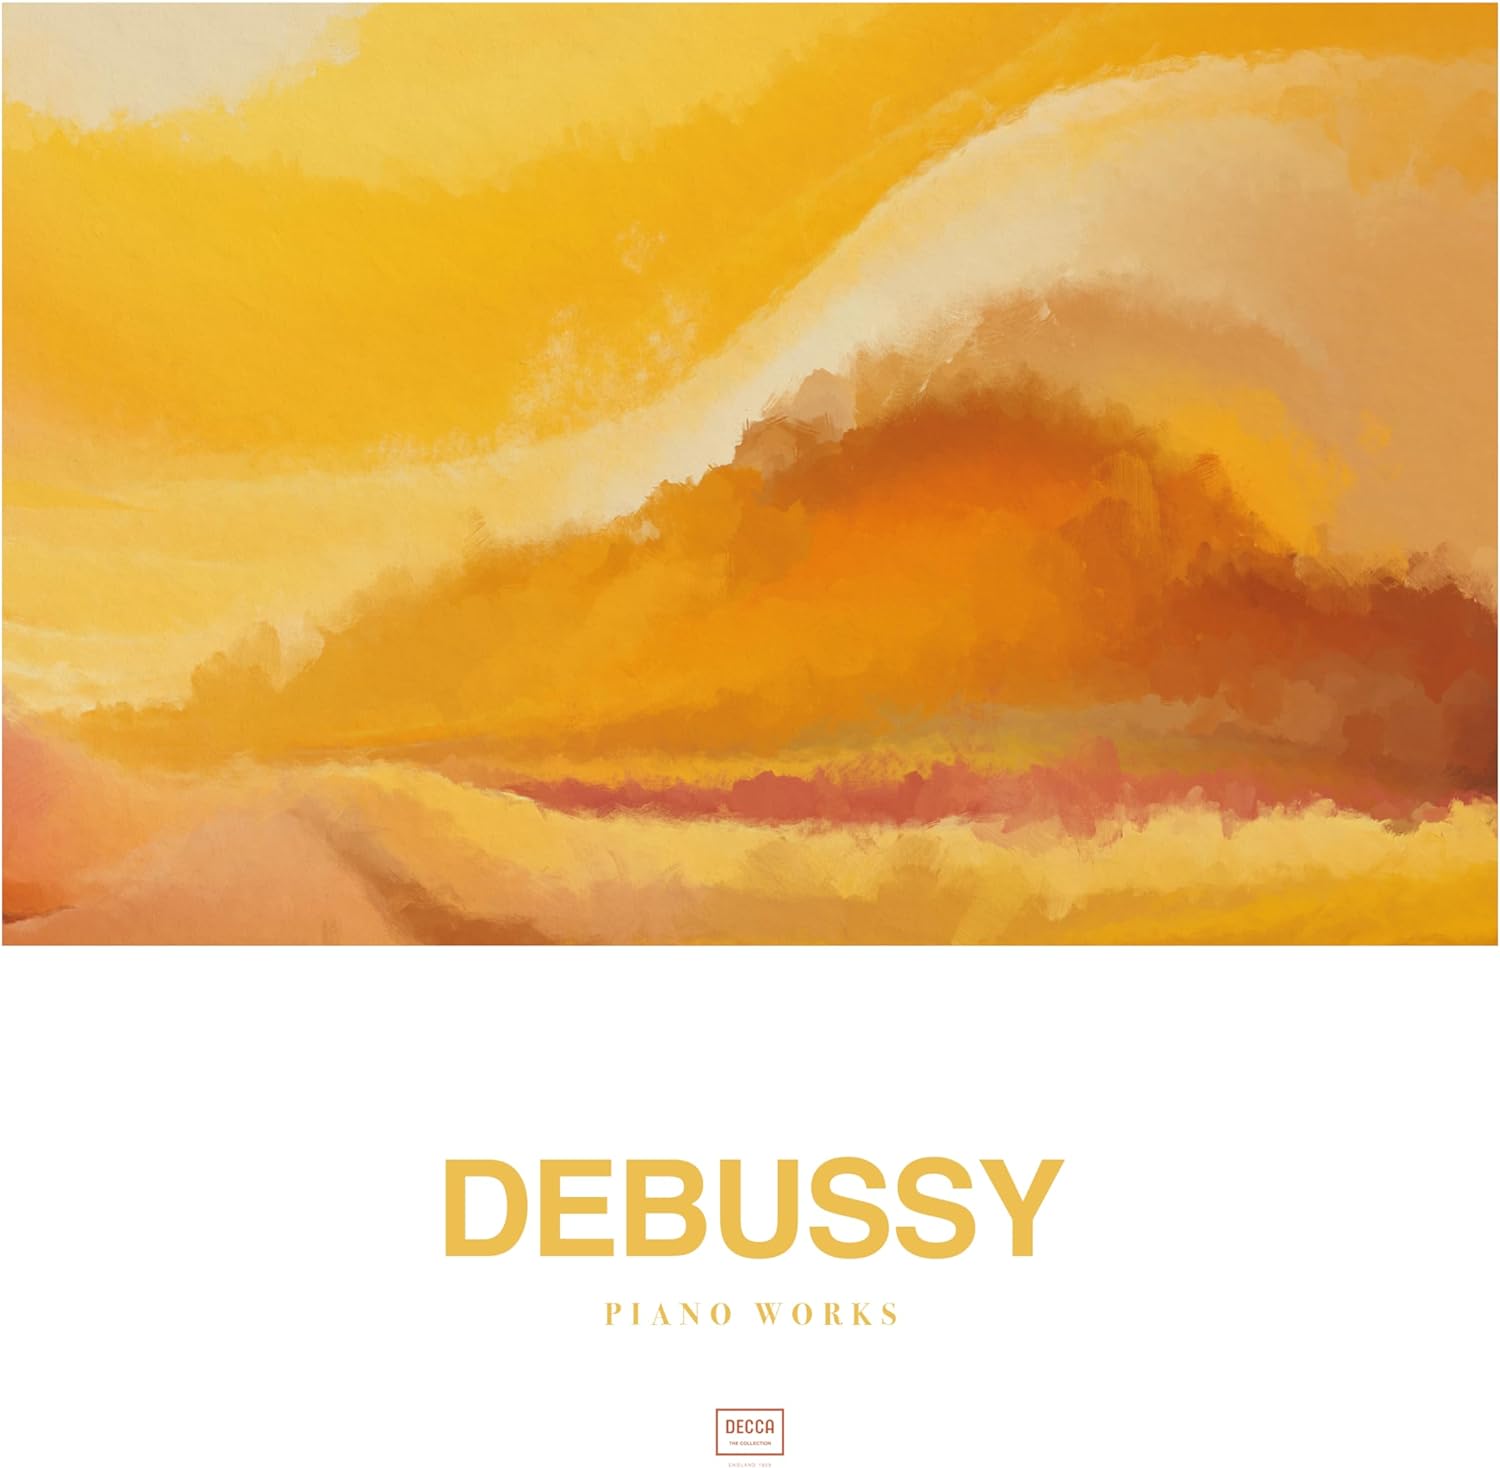 Debussy: The Piano Works | Jean-Yves Thibaudet